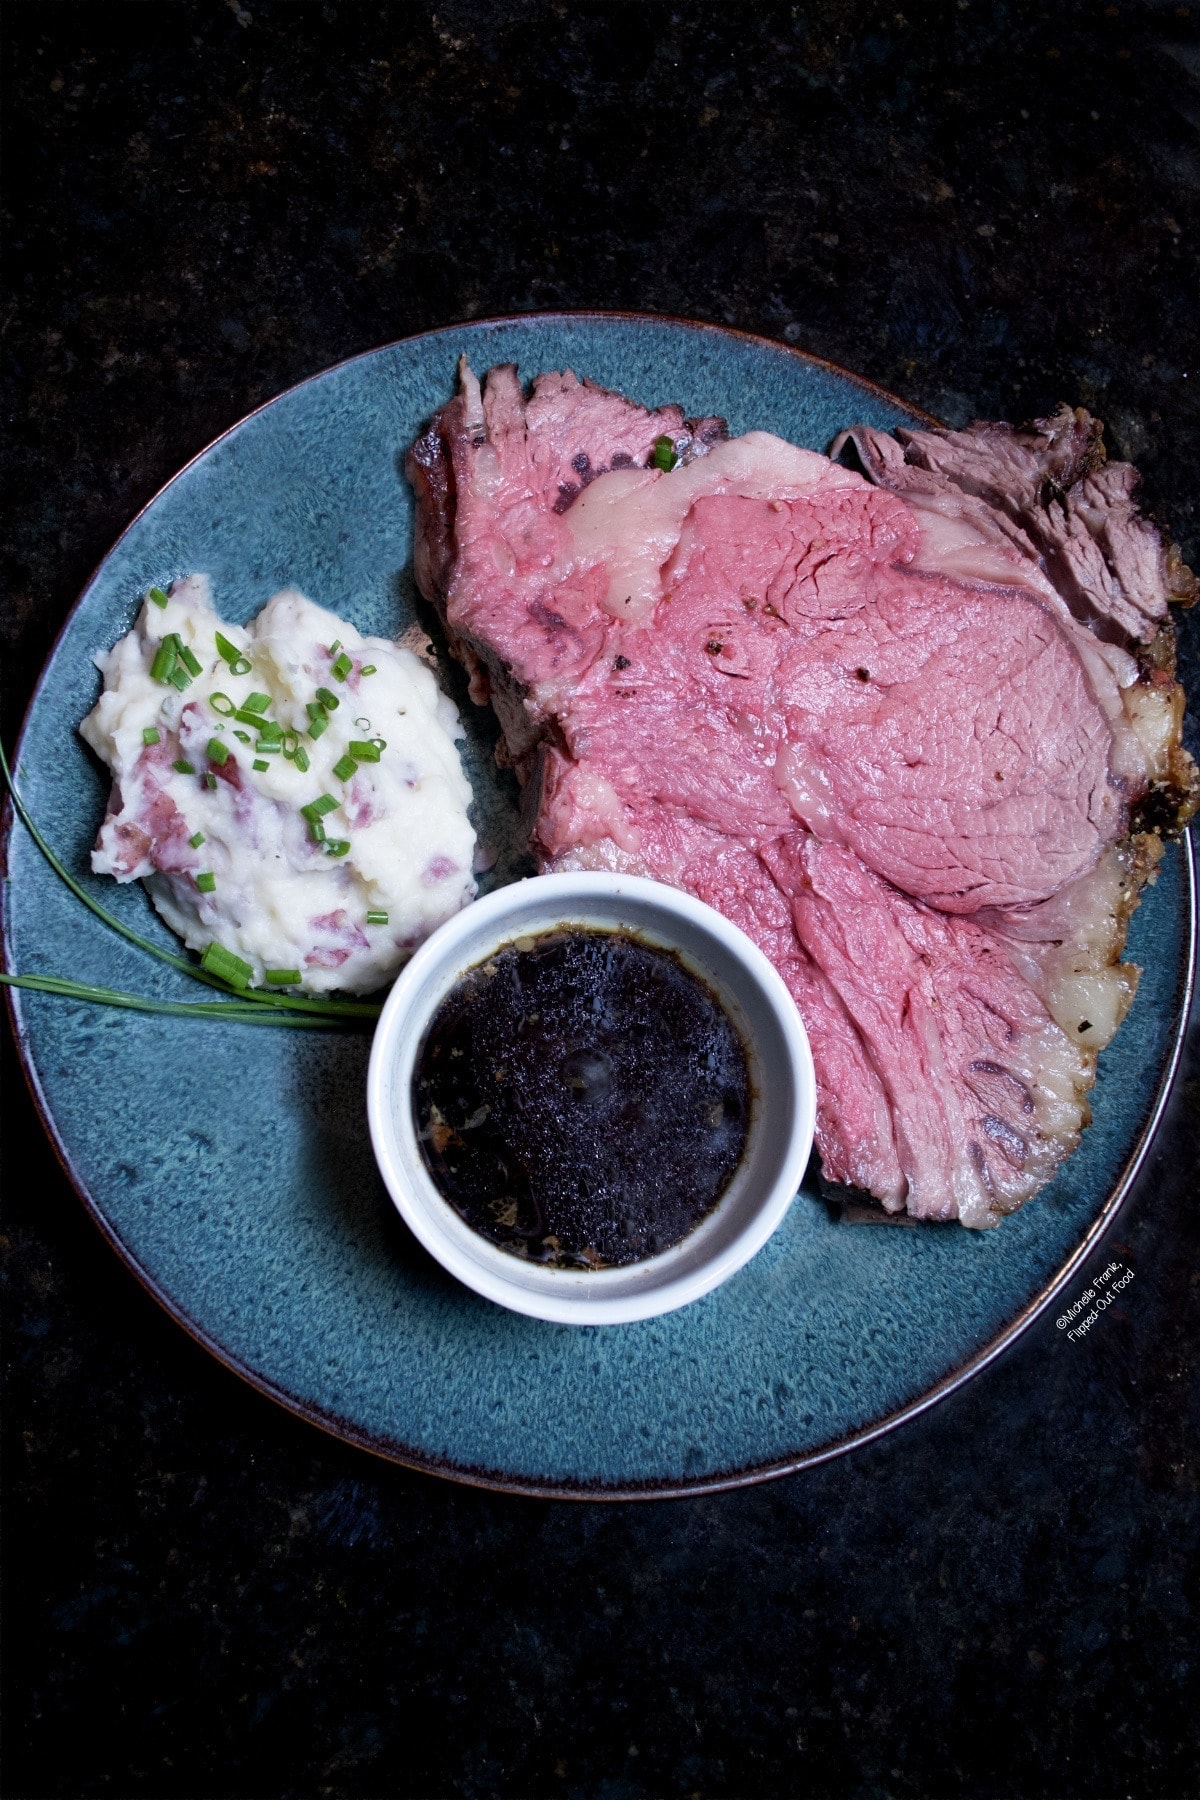 A serving of a slice of roast prime rib on a blue plate with dipping sauce, 